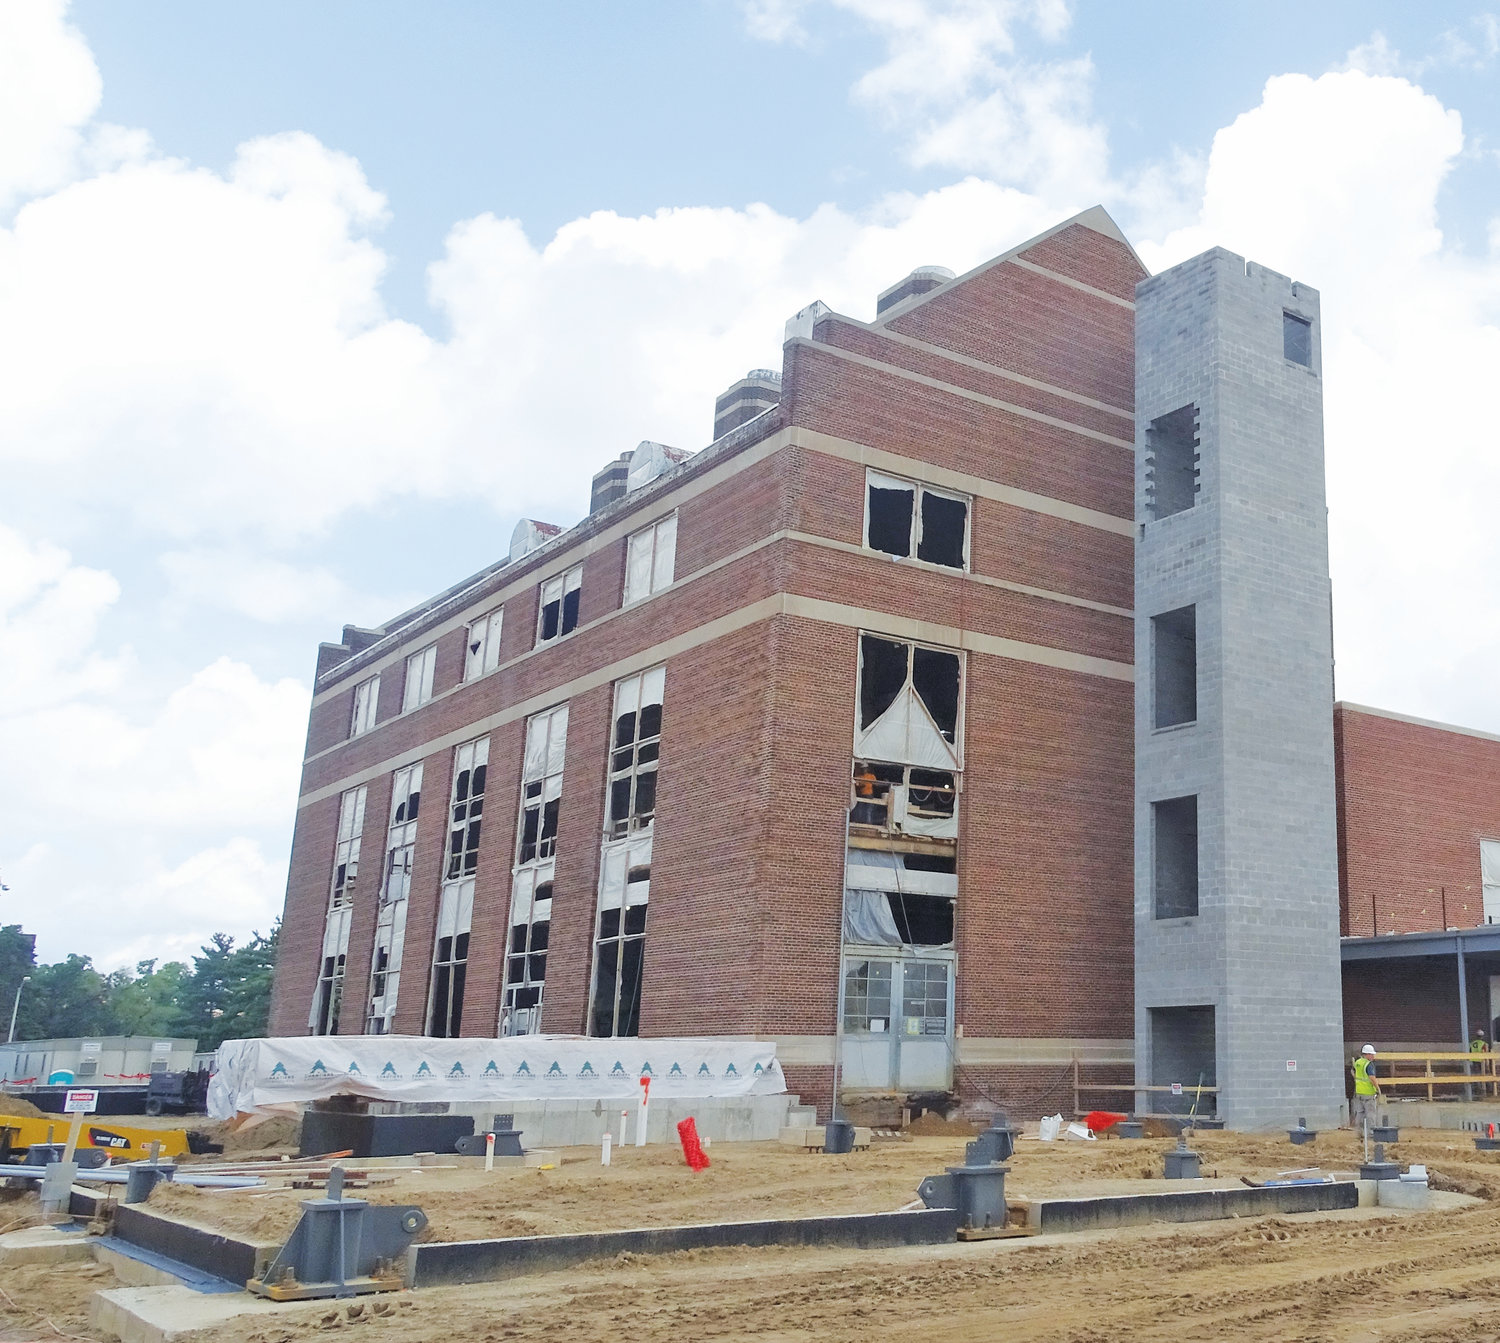 The heart of MSU’s new STEM facility is the 1946 Shaw Lane Power Plant.